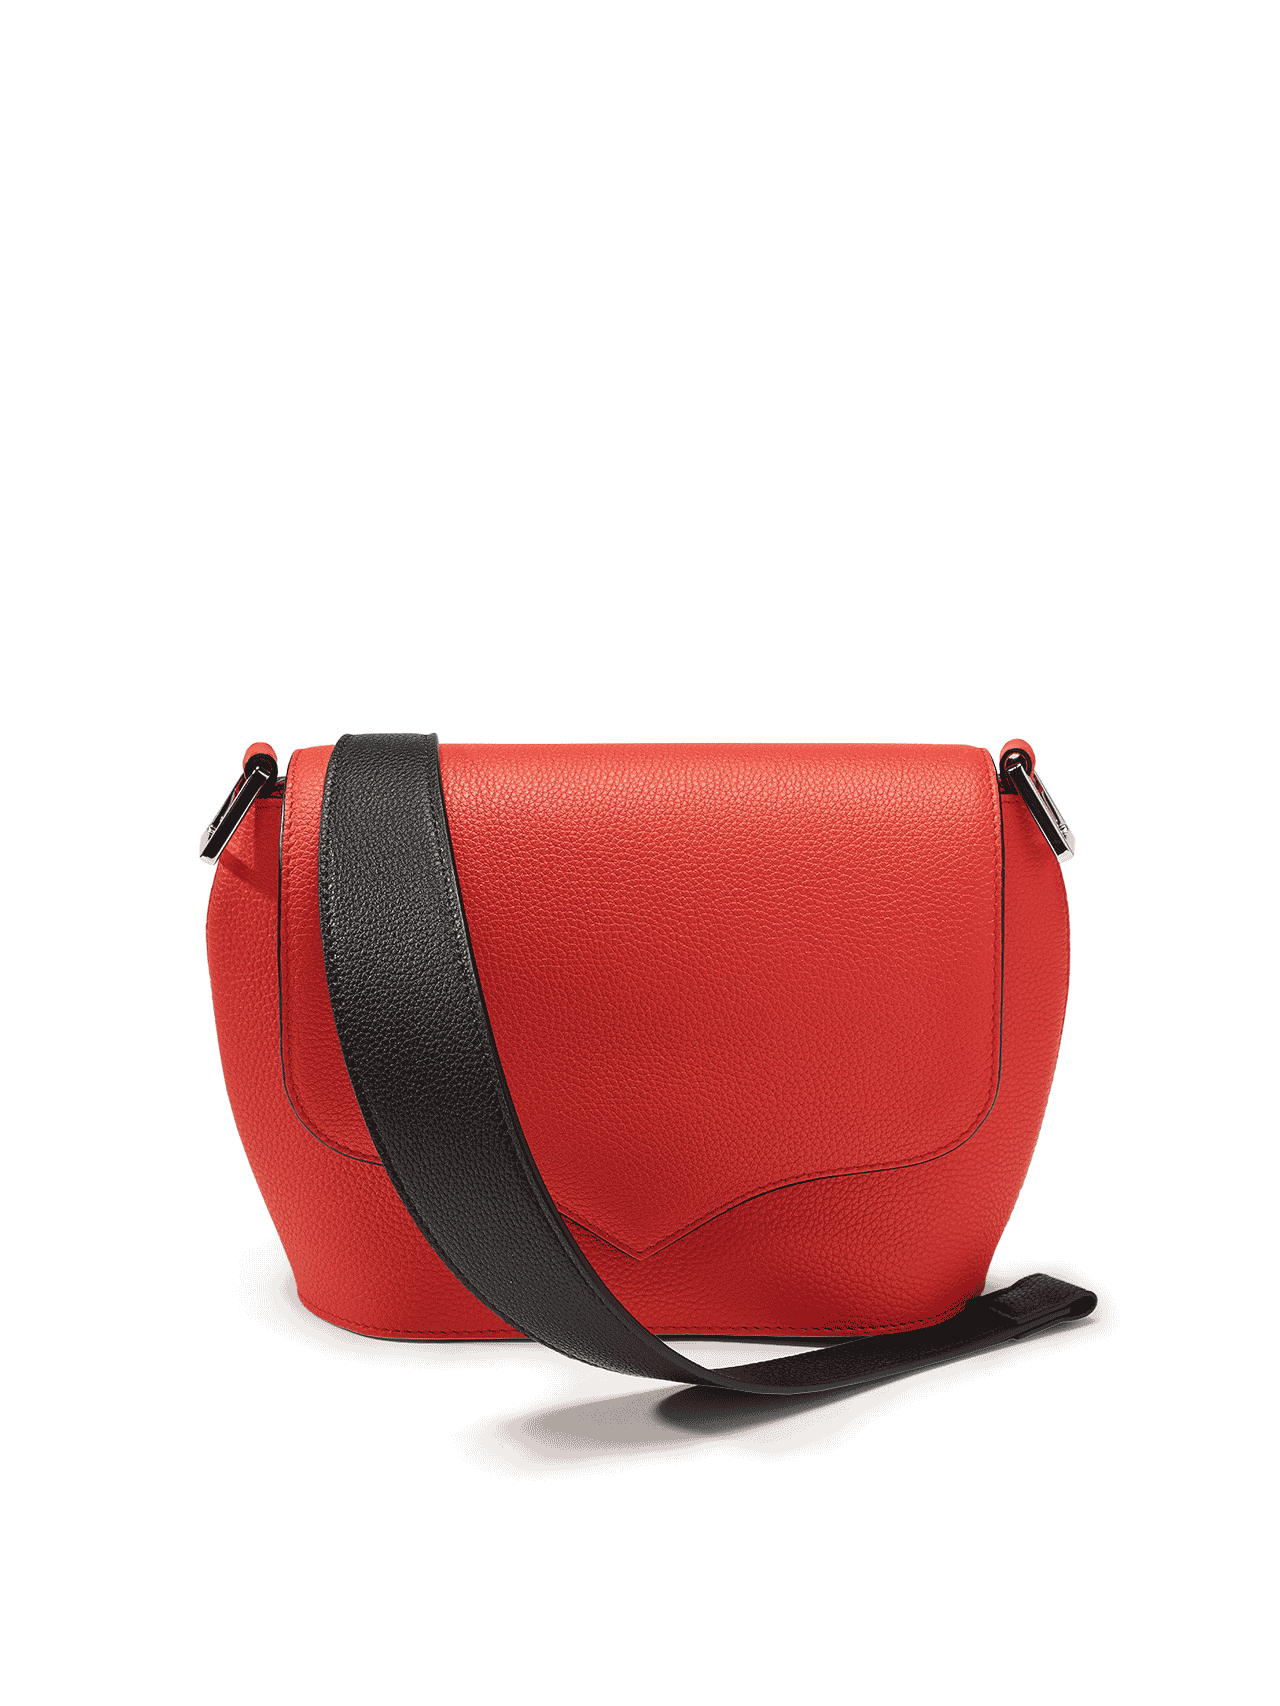 bag leather jean rousseau red black